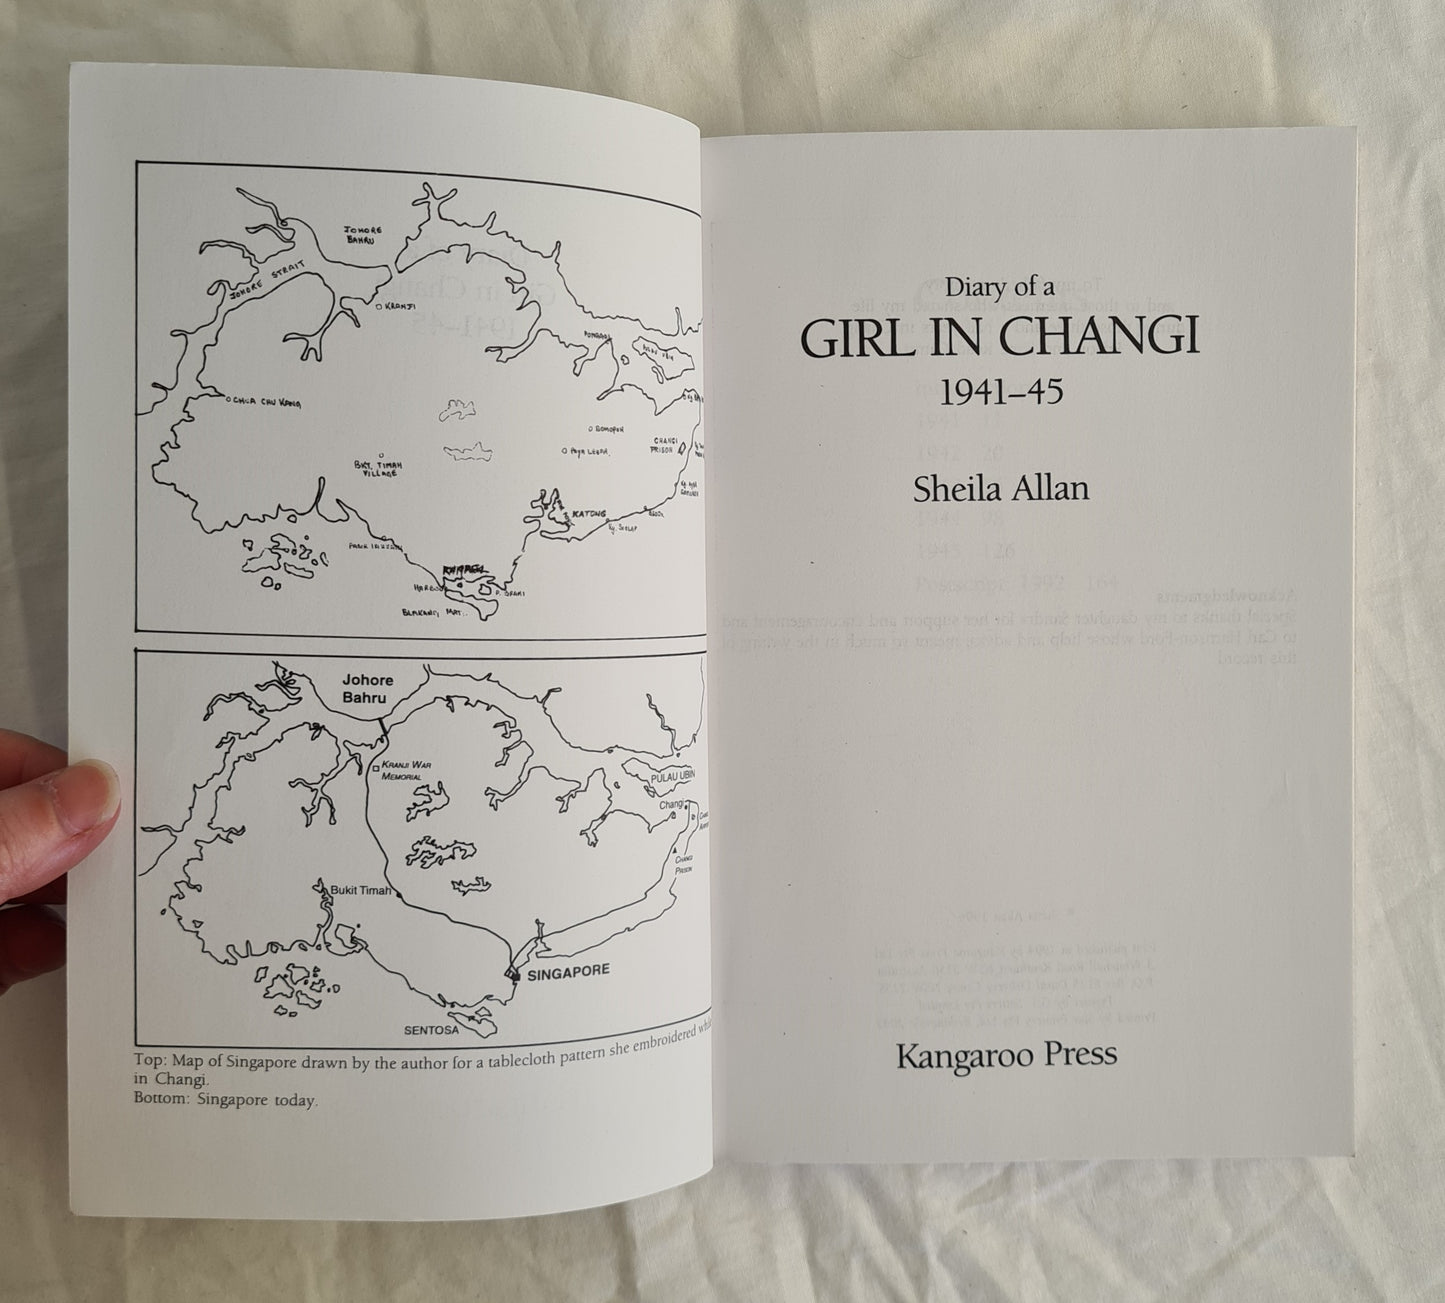 Diary of a Girl in Changi 1941 - 1945 by Sheila Allan